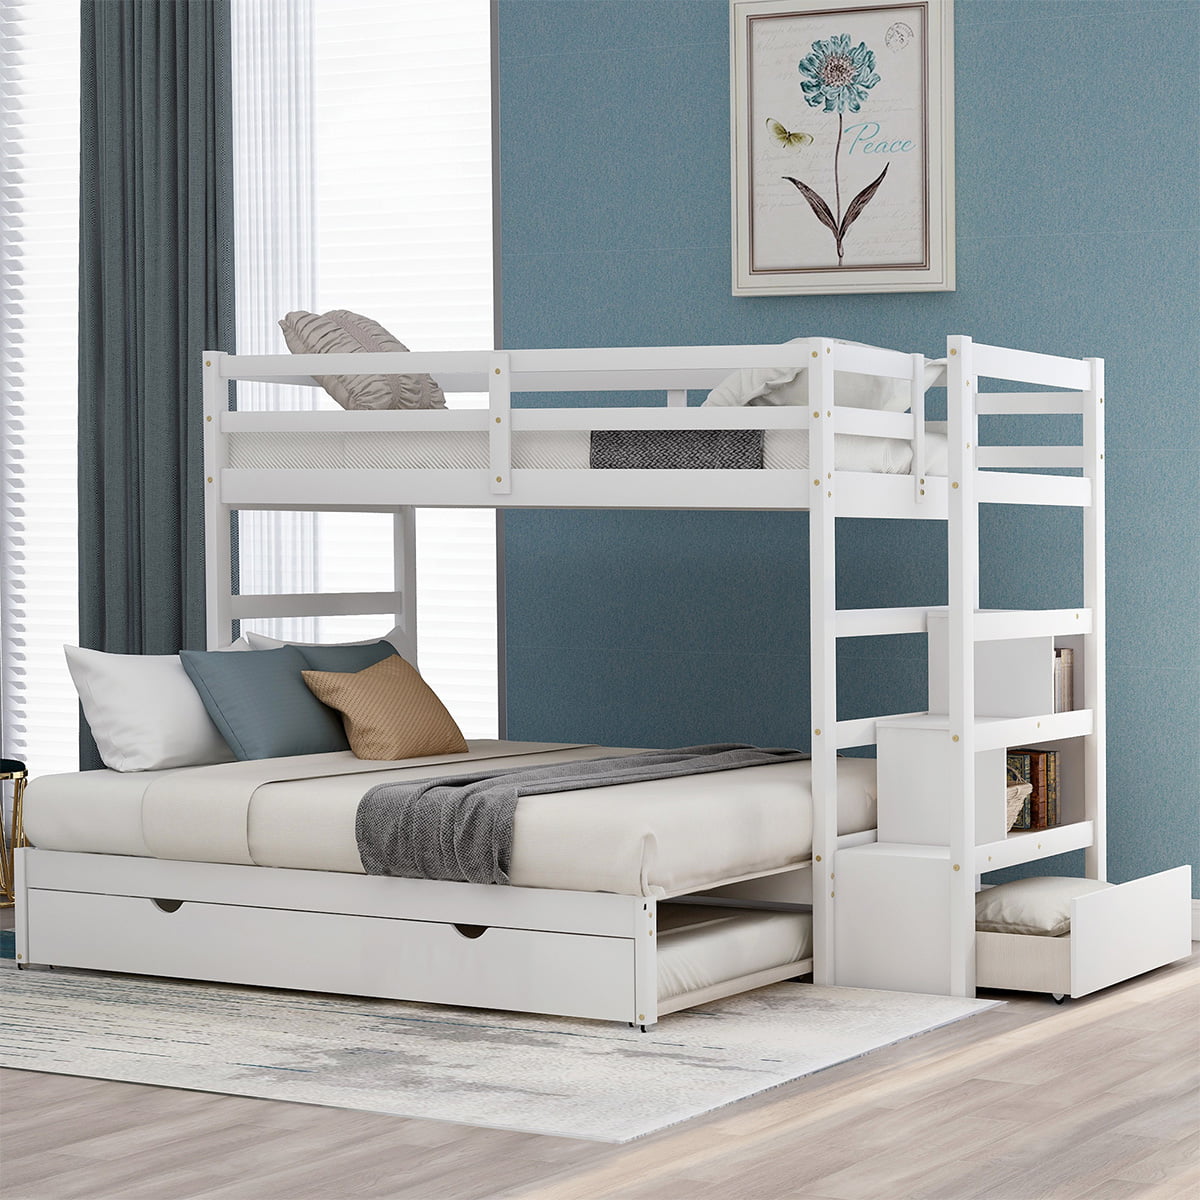 SENTERN Twin over Twin/King Bunk Bed with Twinsize Trundle